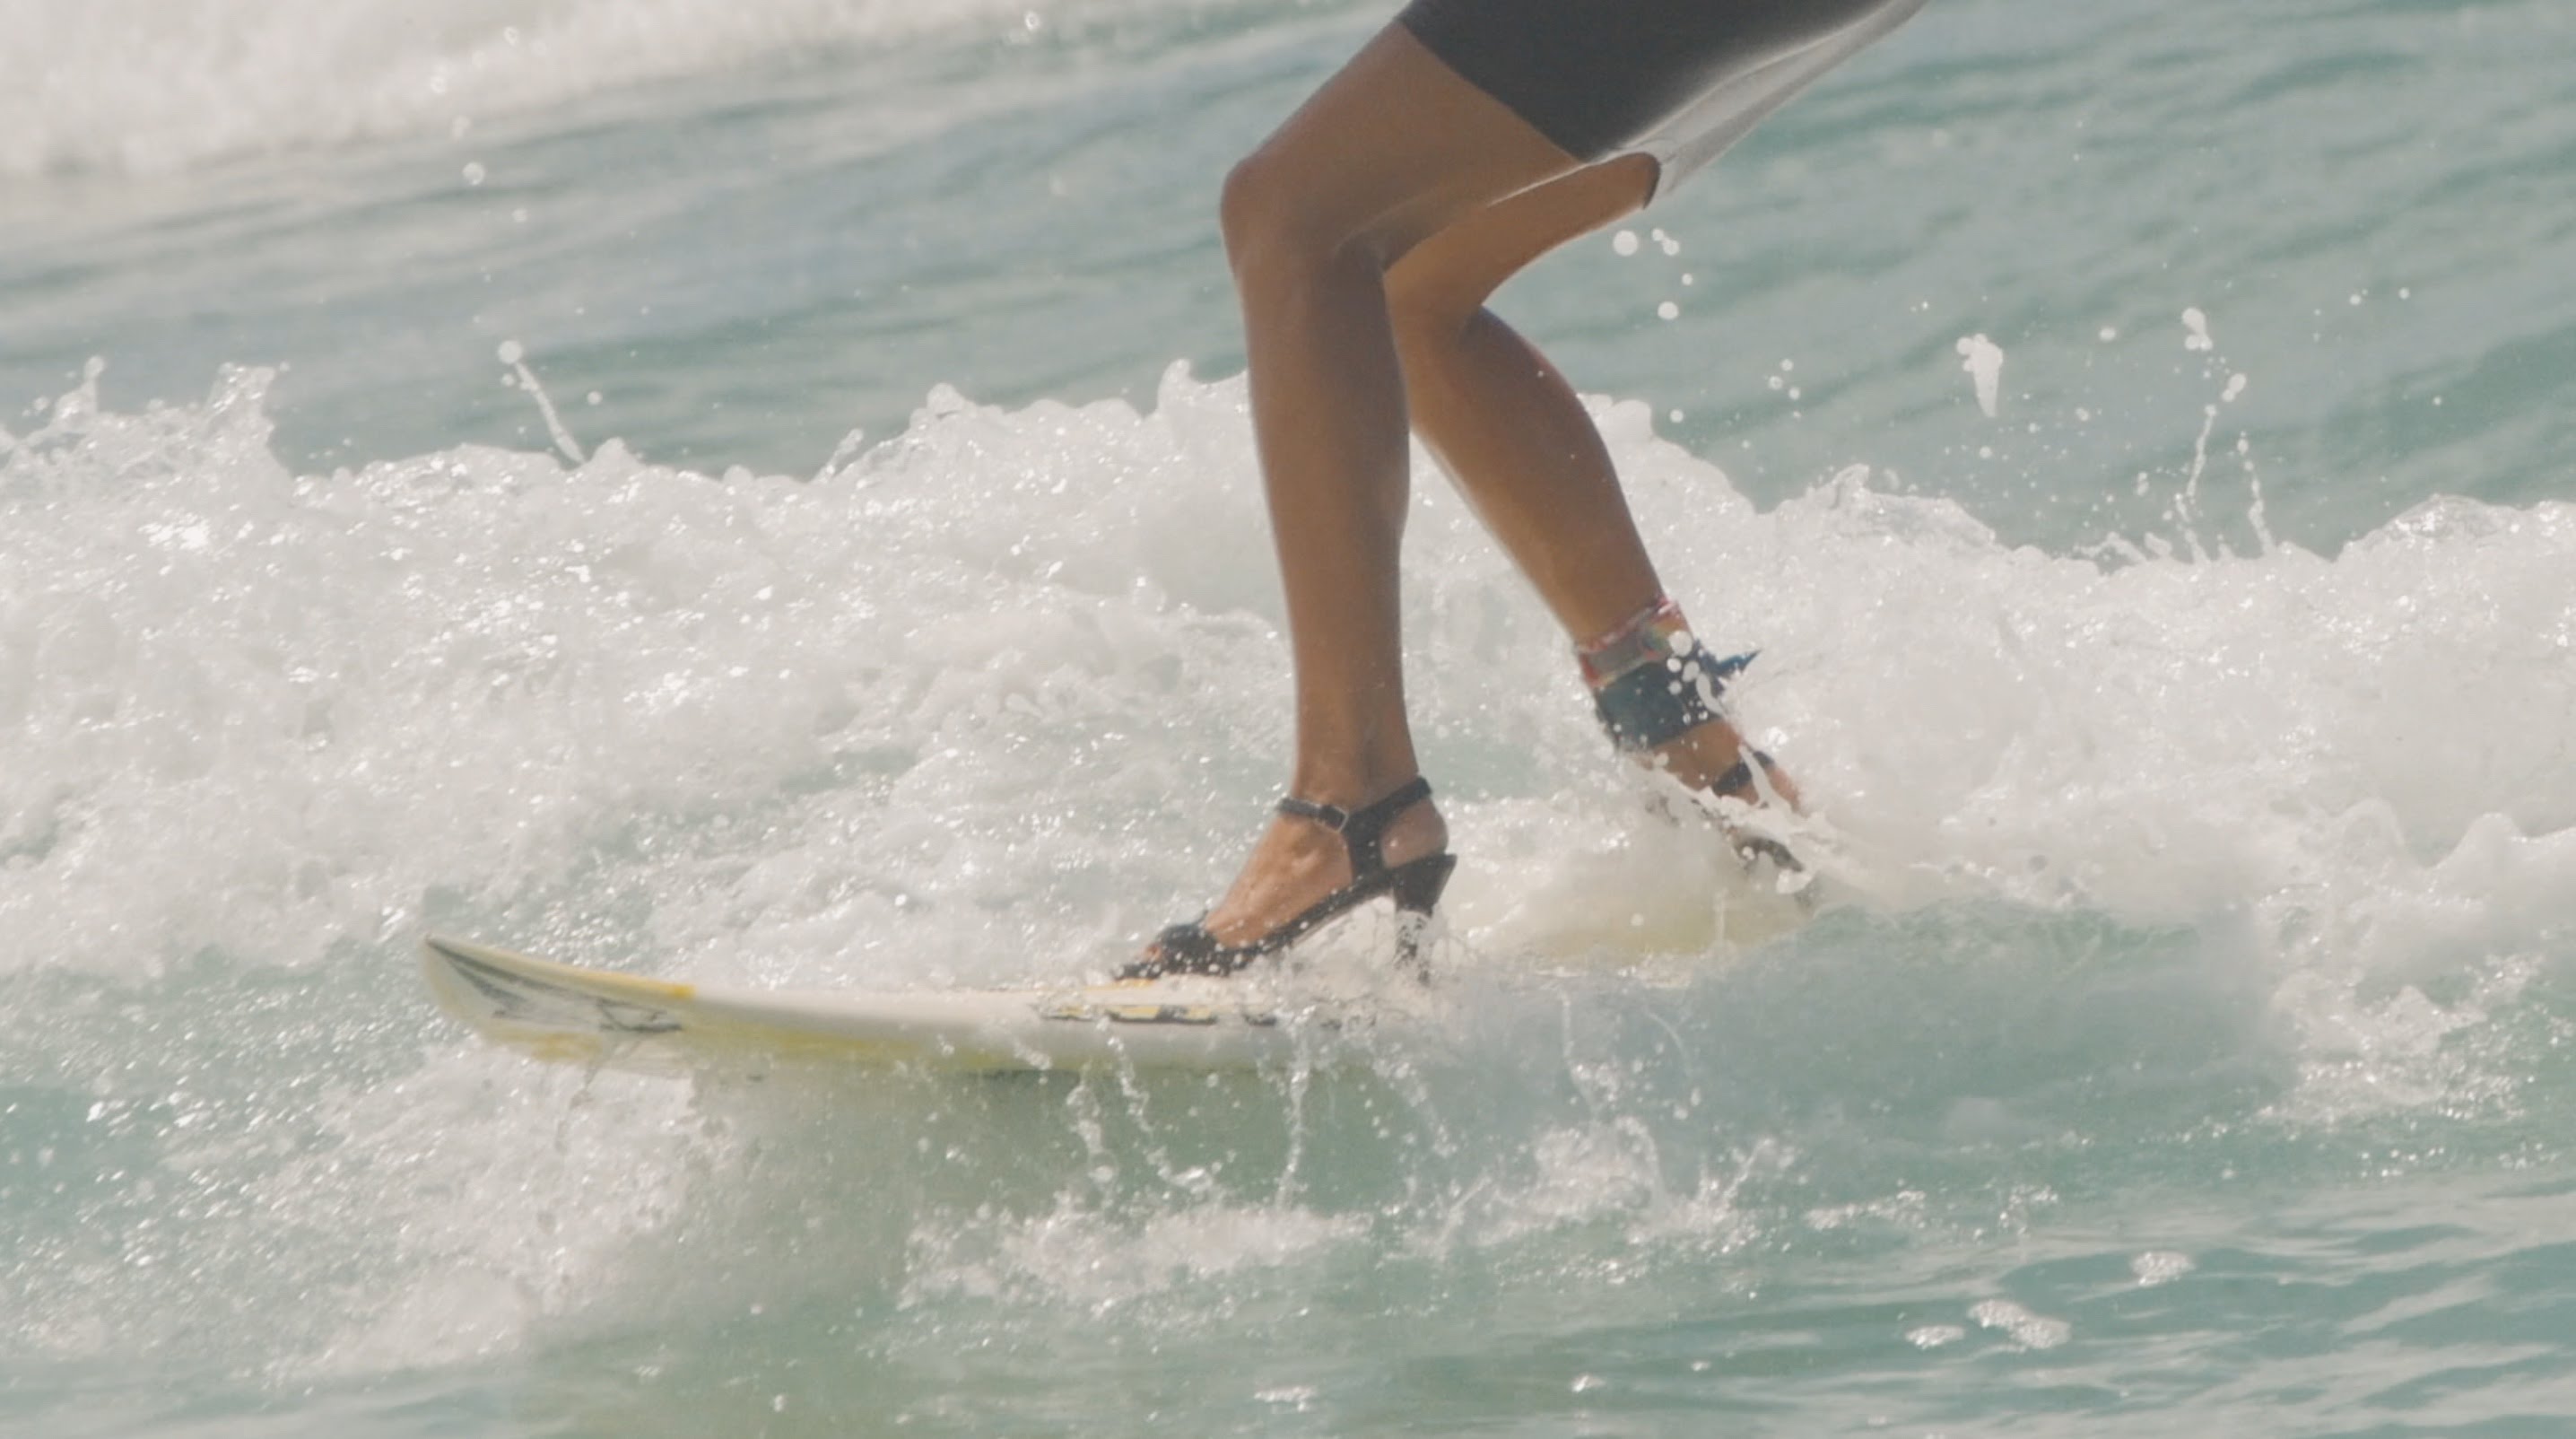 Surf in High Heels - Almo - YouTube